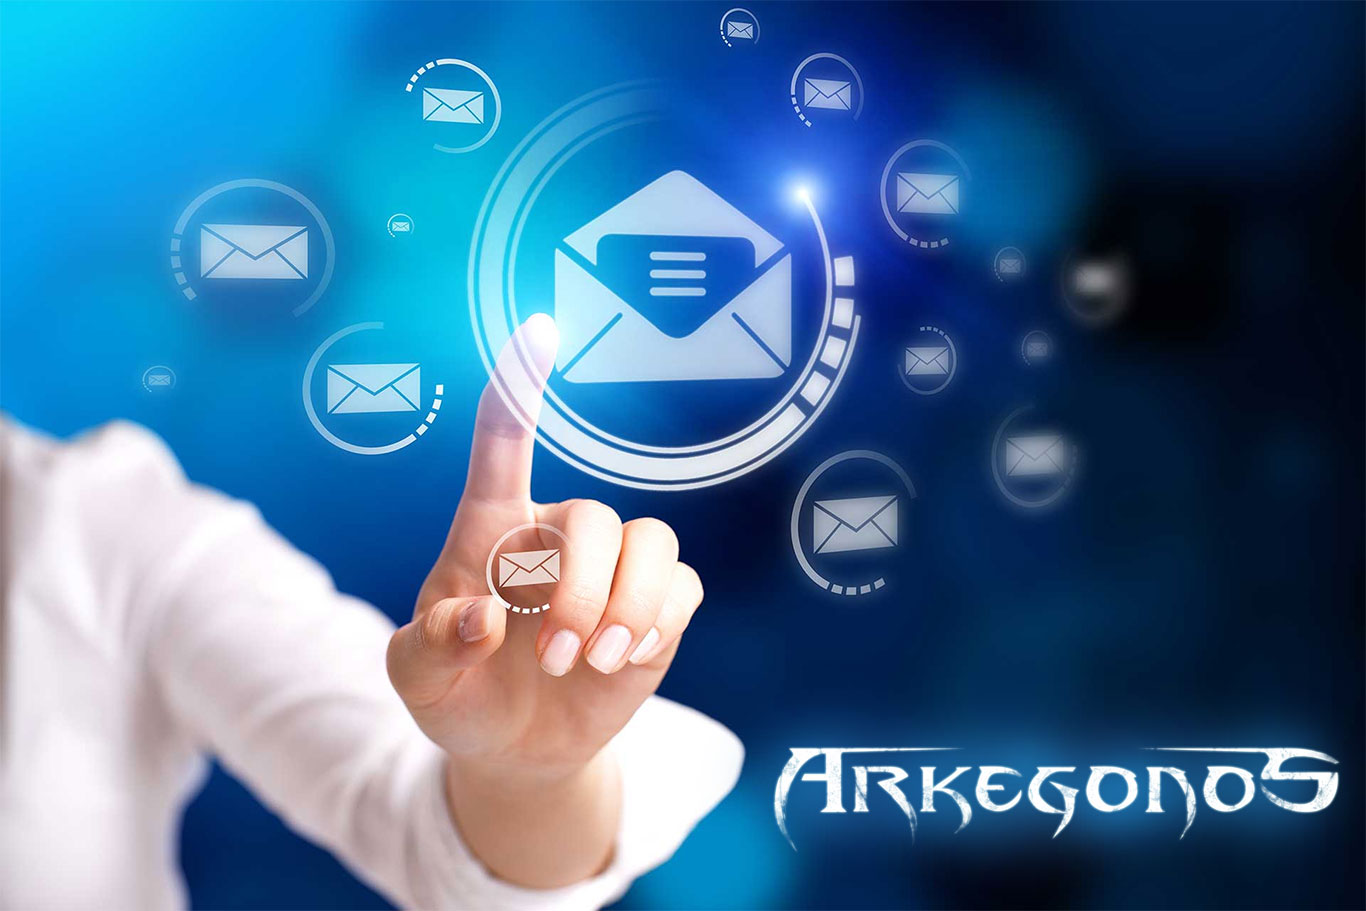 Arkegonos Newsletter: don't miss a thing!